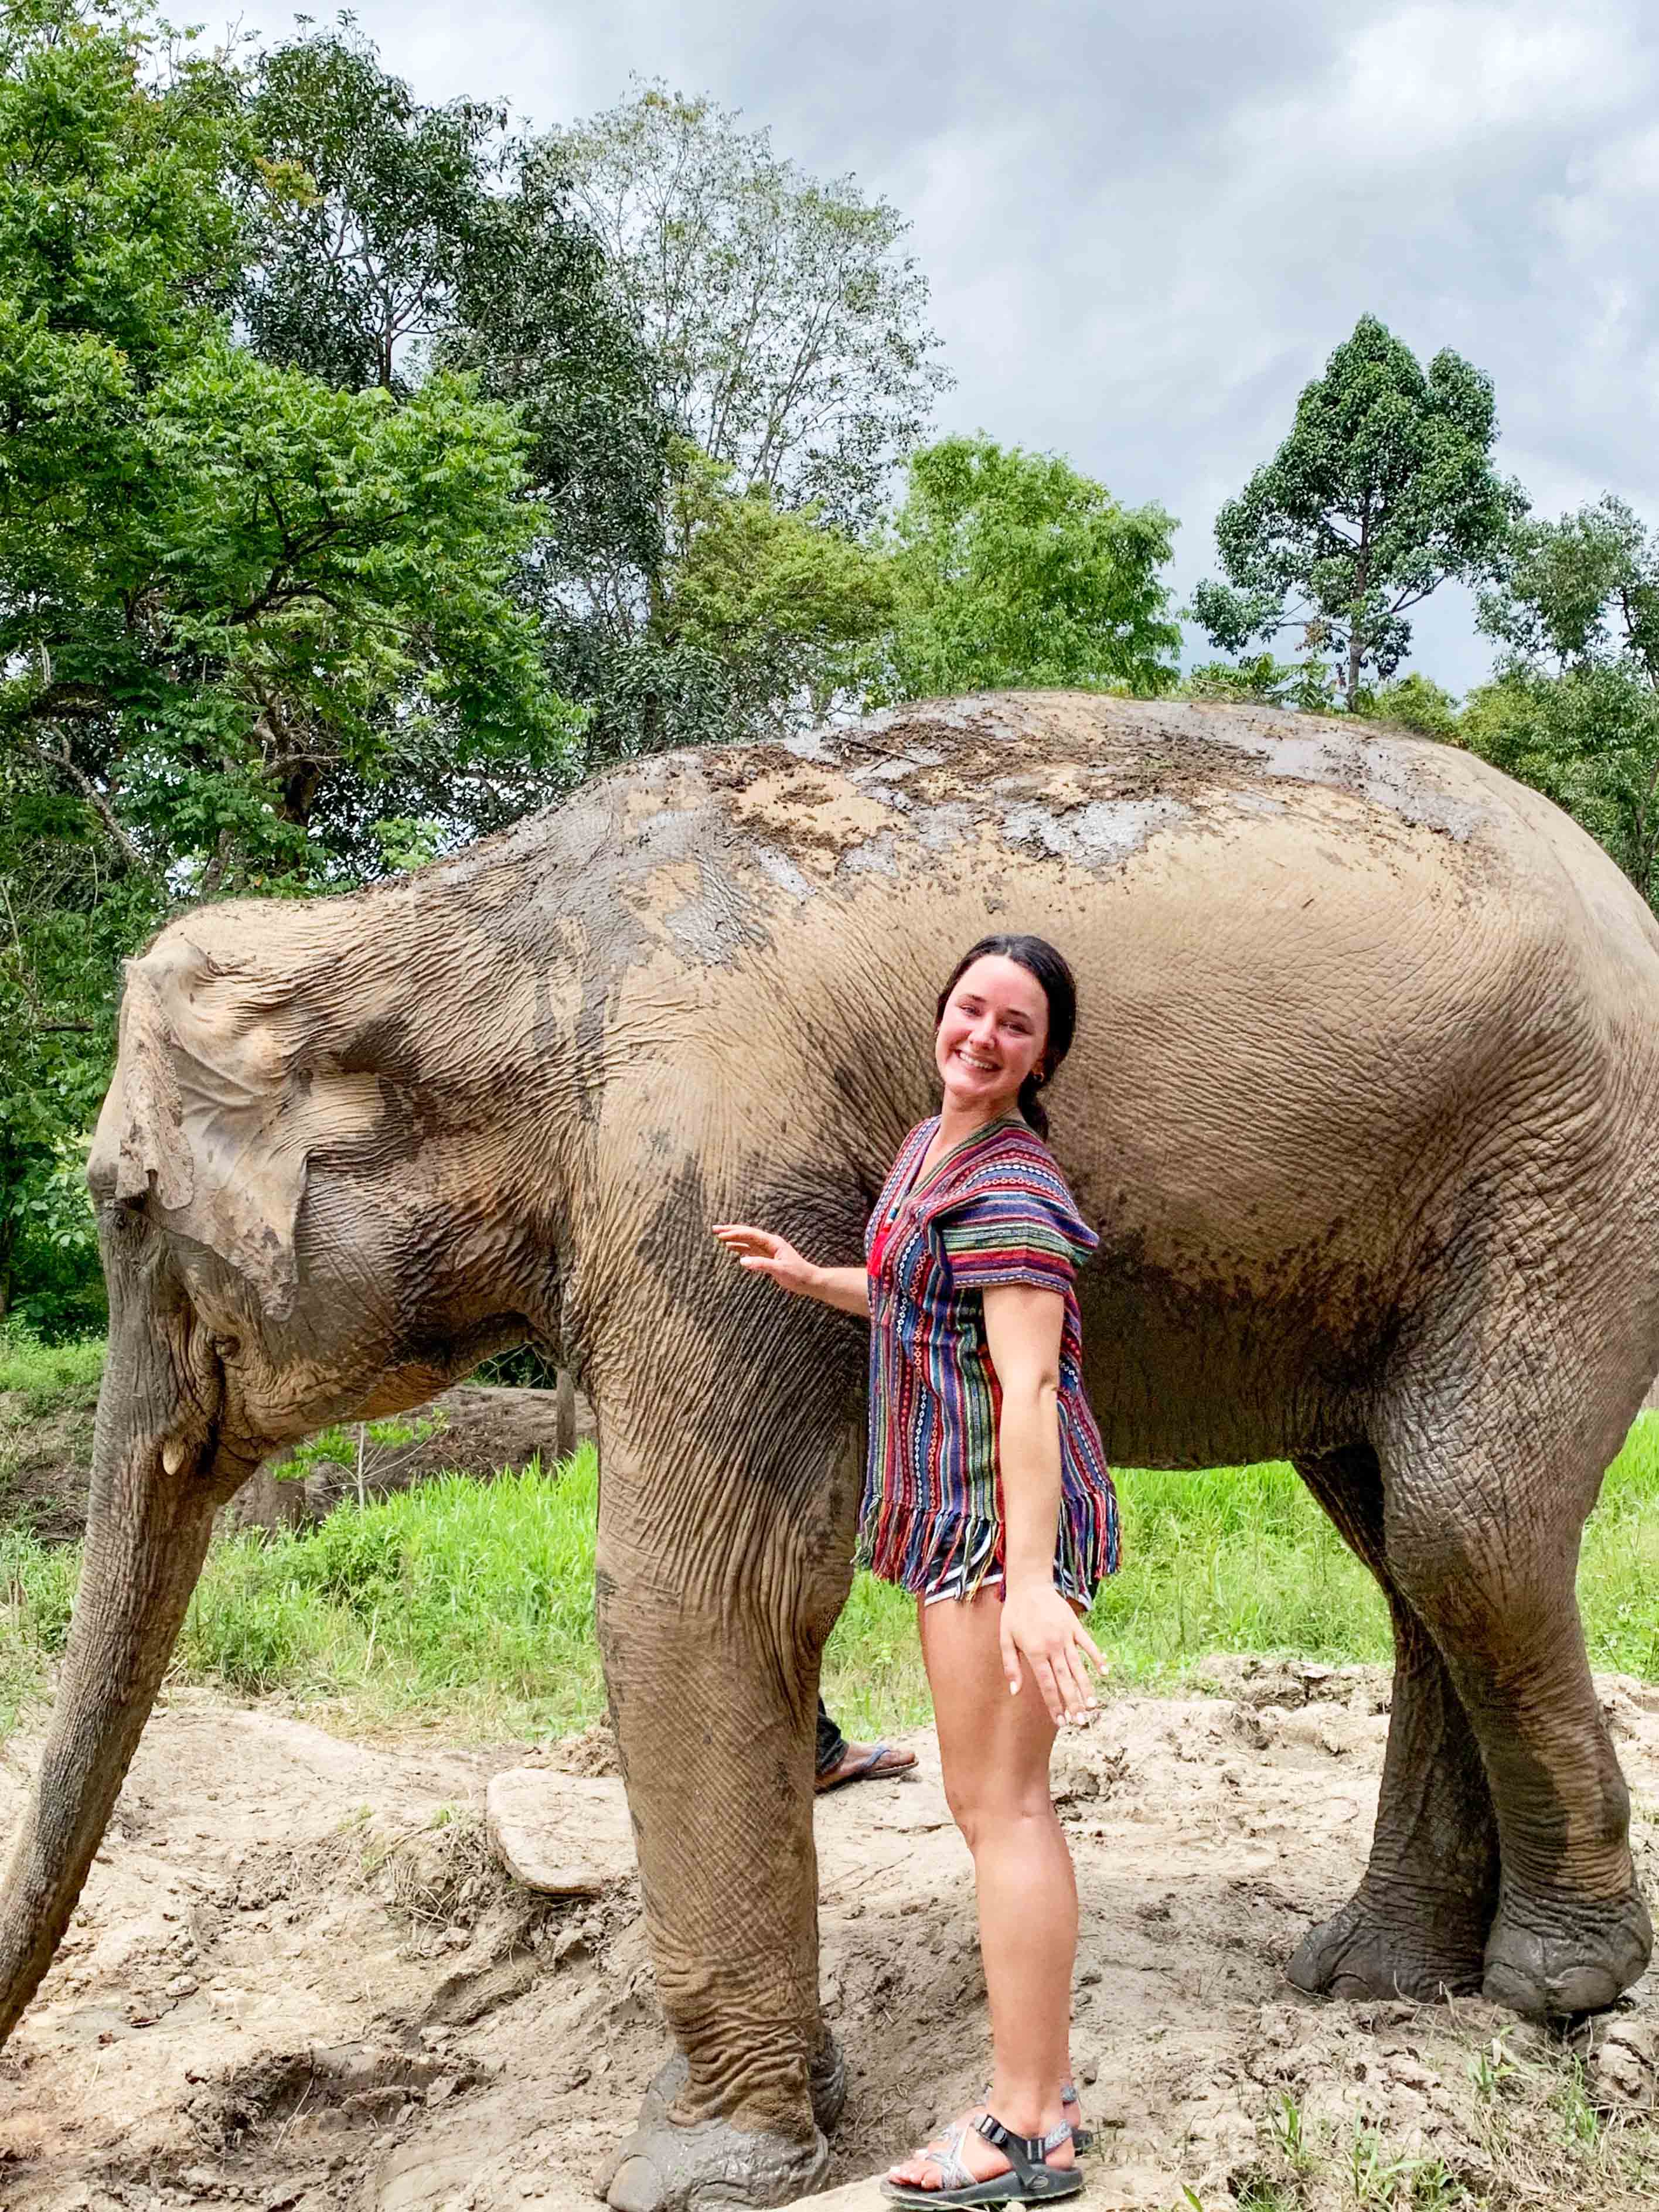 A student taking care of an elephant in Chiang Mai, Thailand.